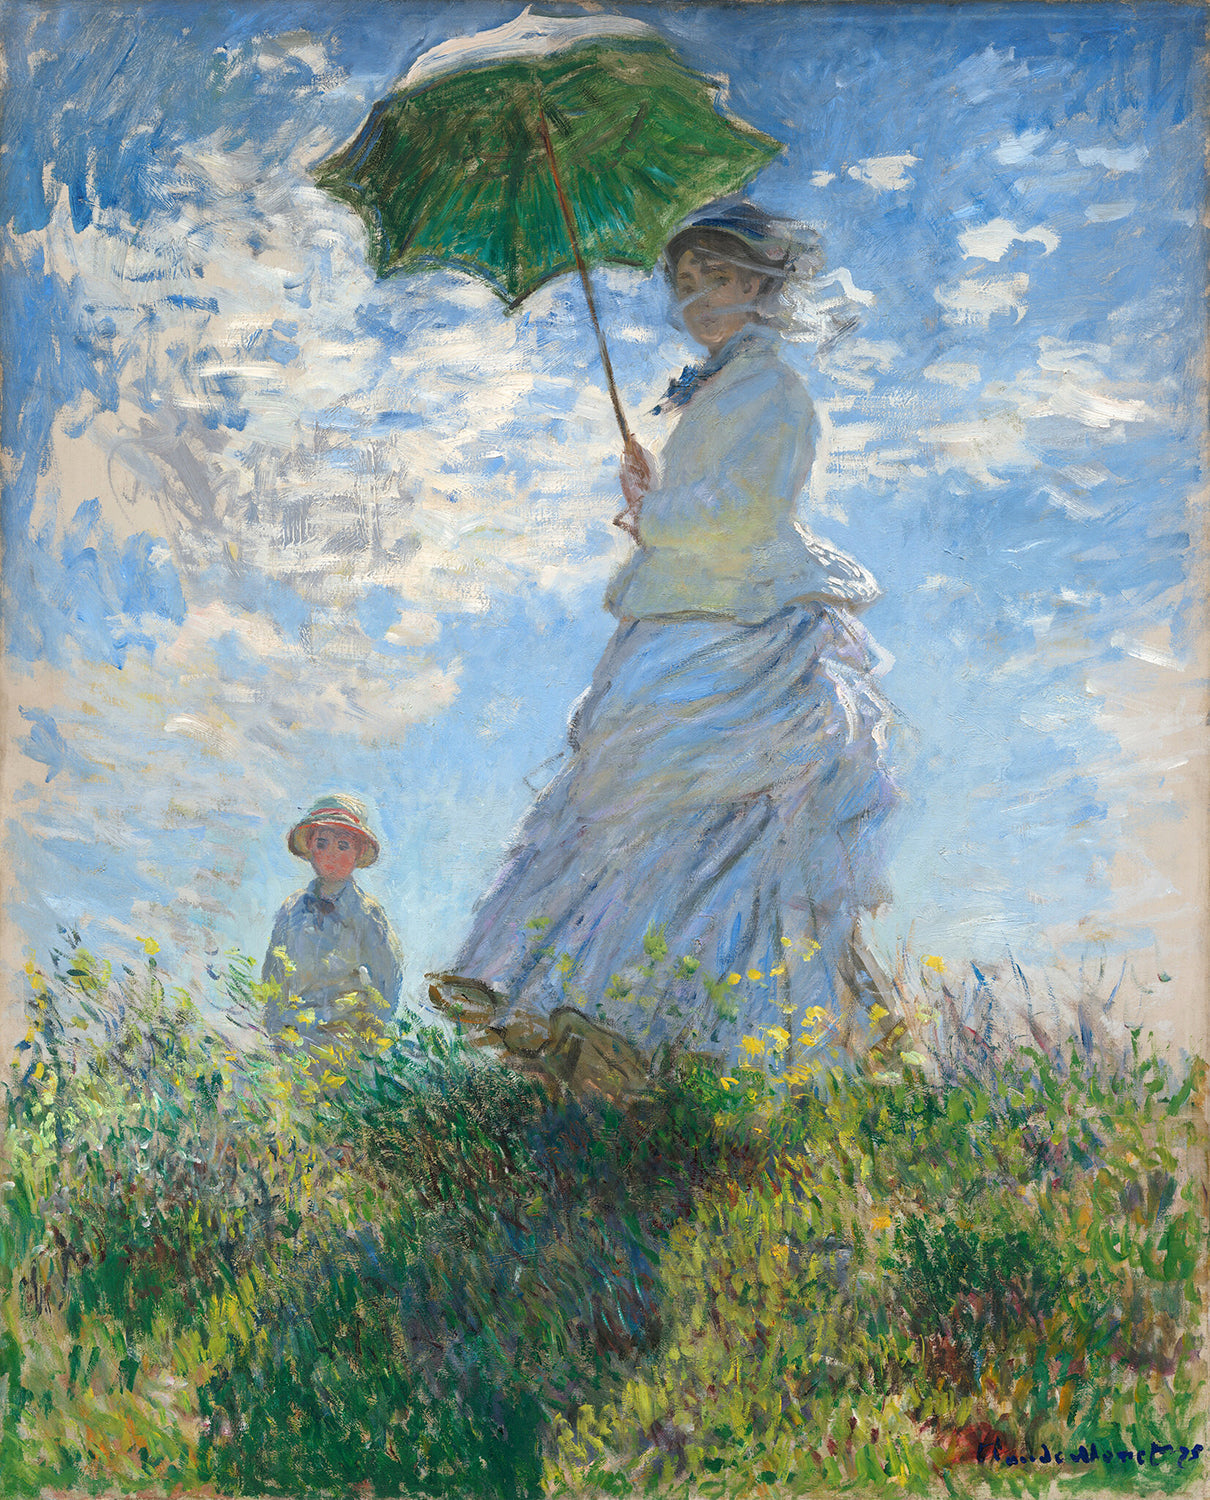 Woman with a Parasol - Madame Monet and Her Son by Claude Monet Art Print